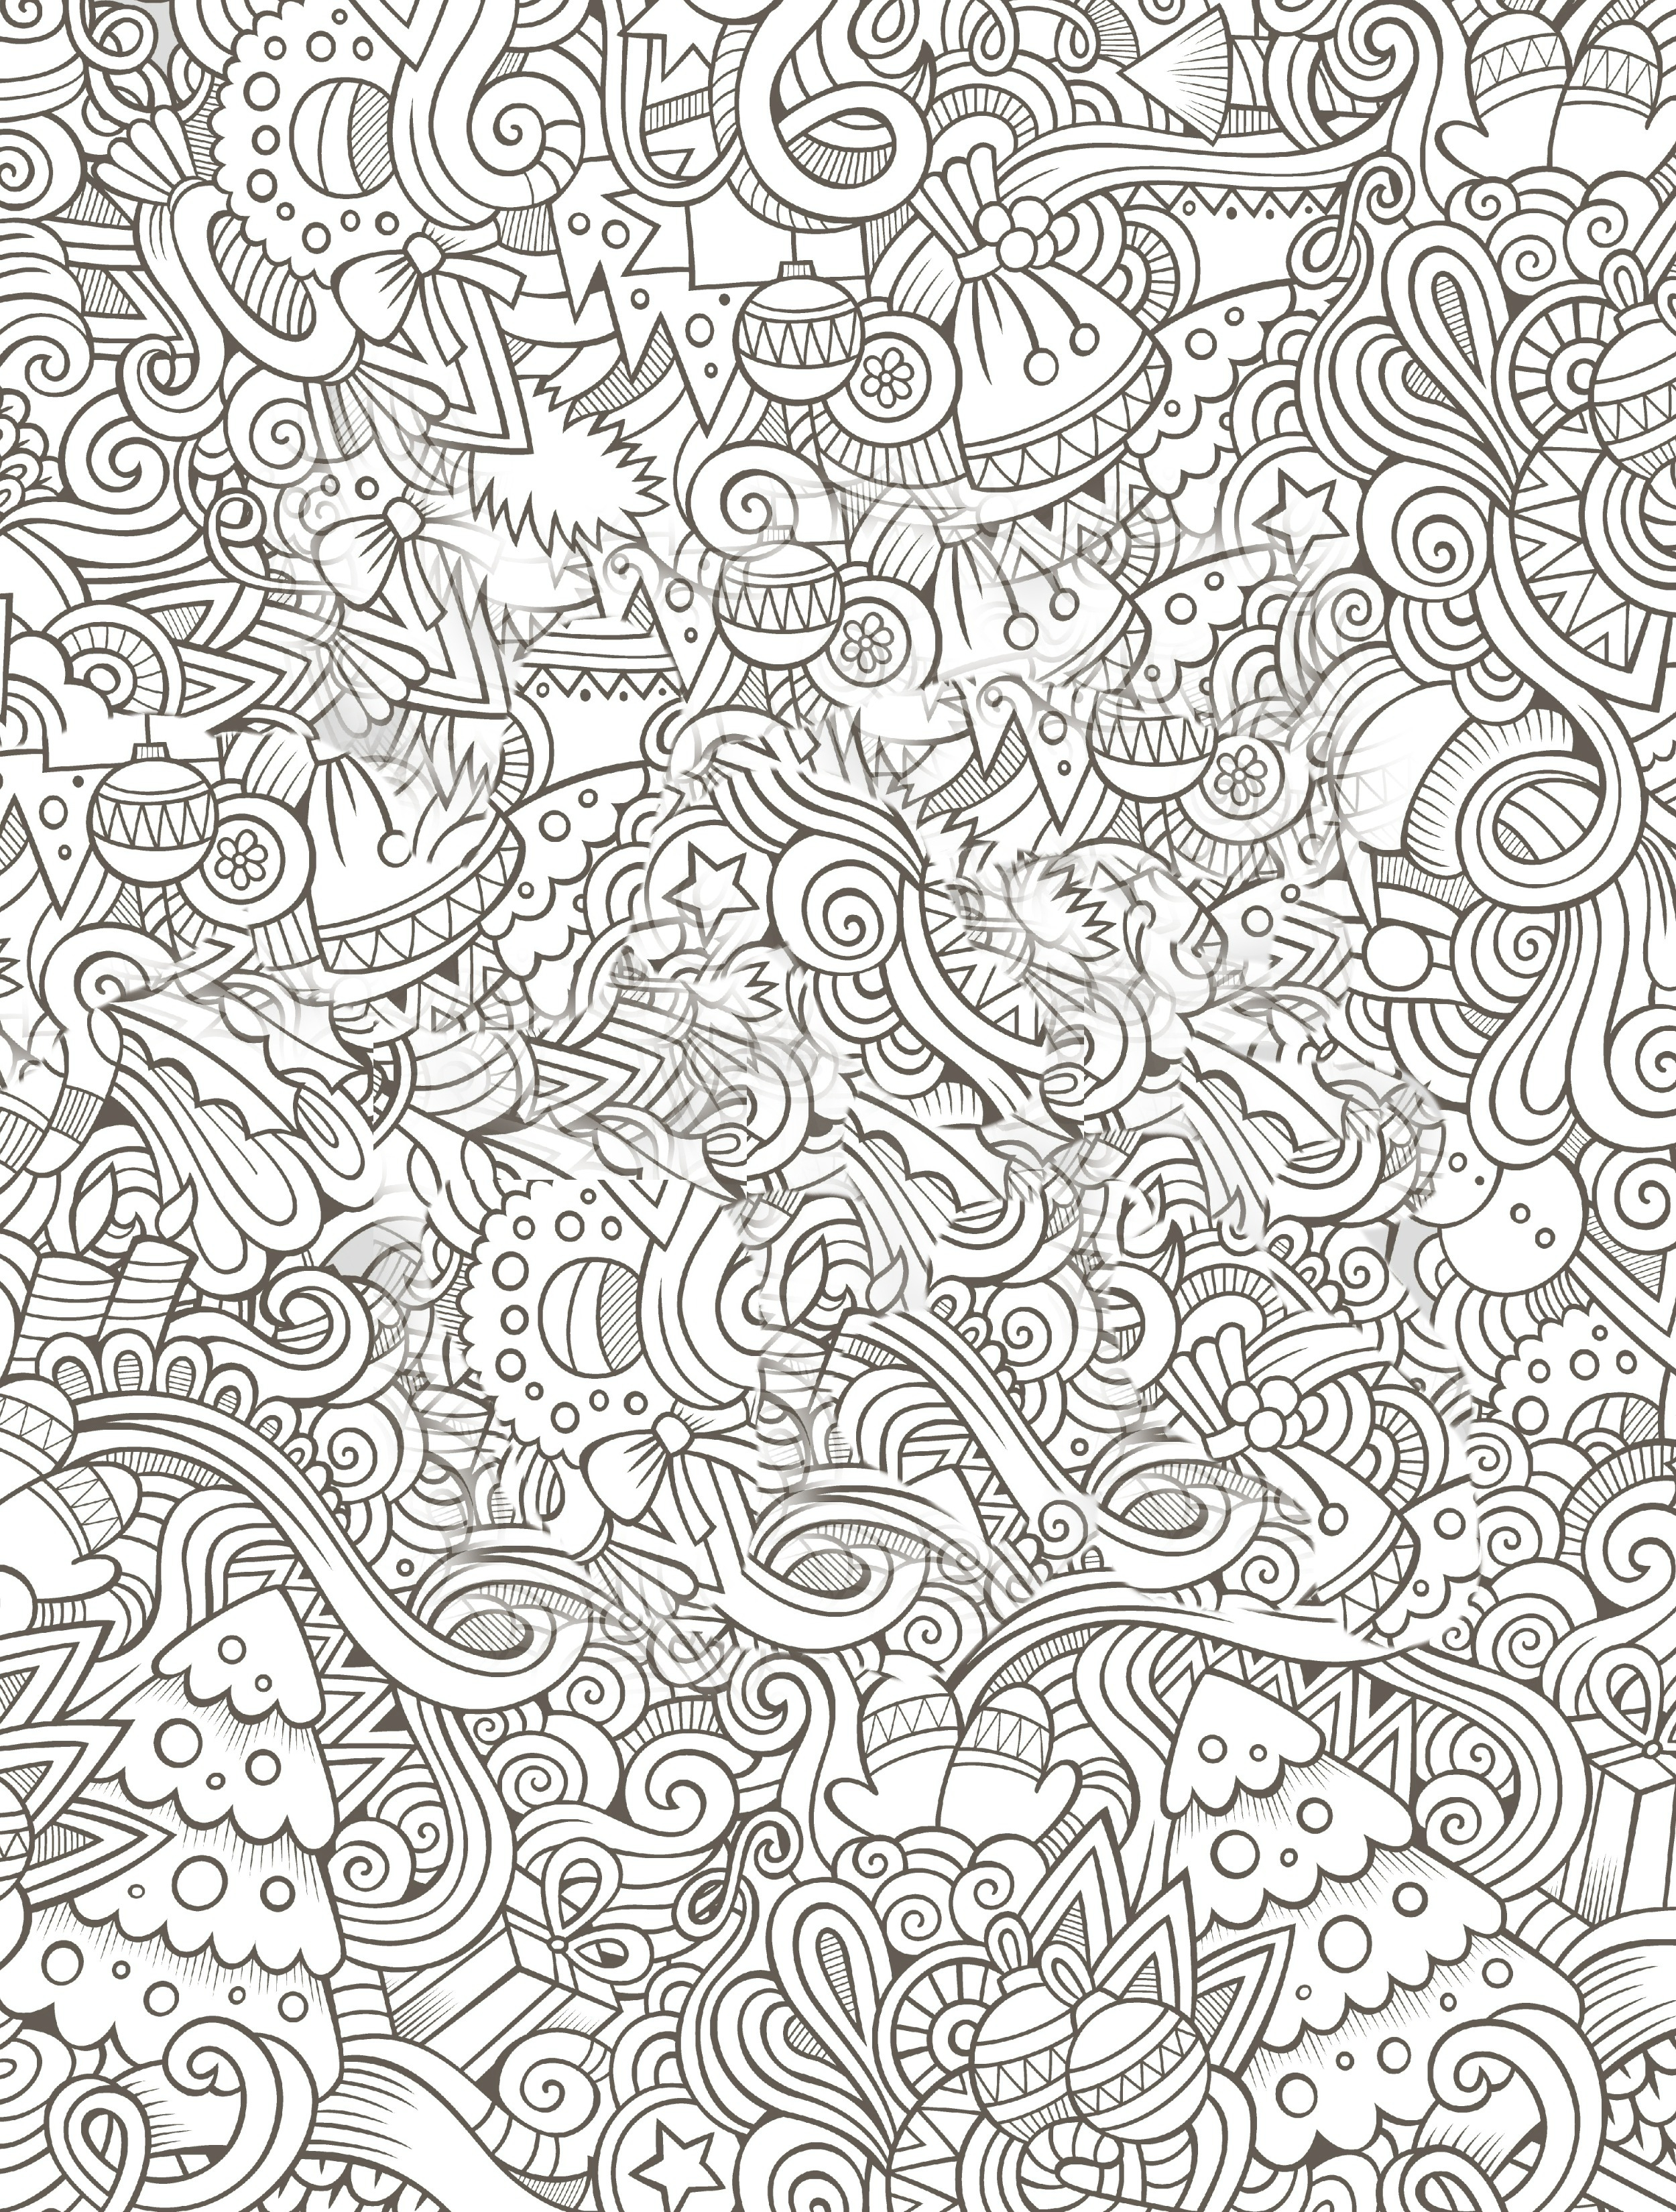 Coloring Pages : Free Printable Holiday Adult Coloring Pages Books - Free Printable Coloring Books For Adults